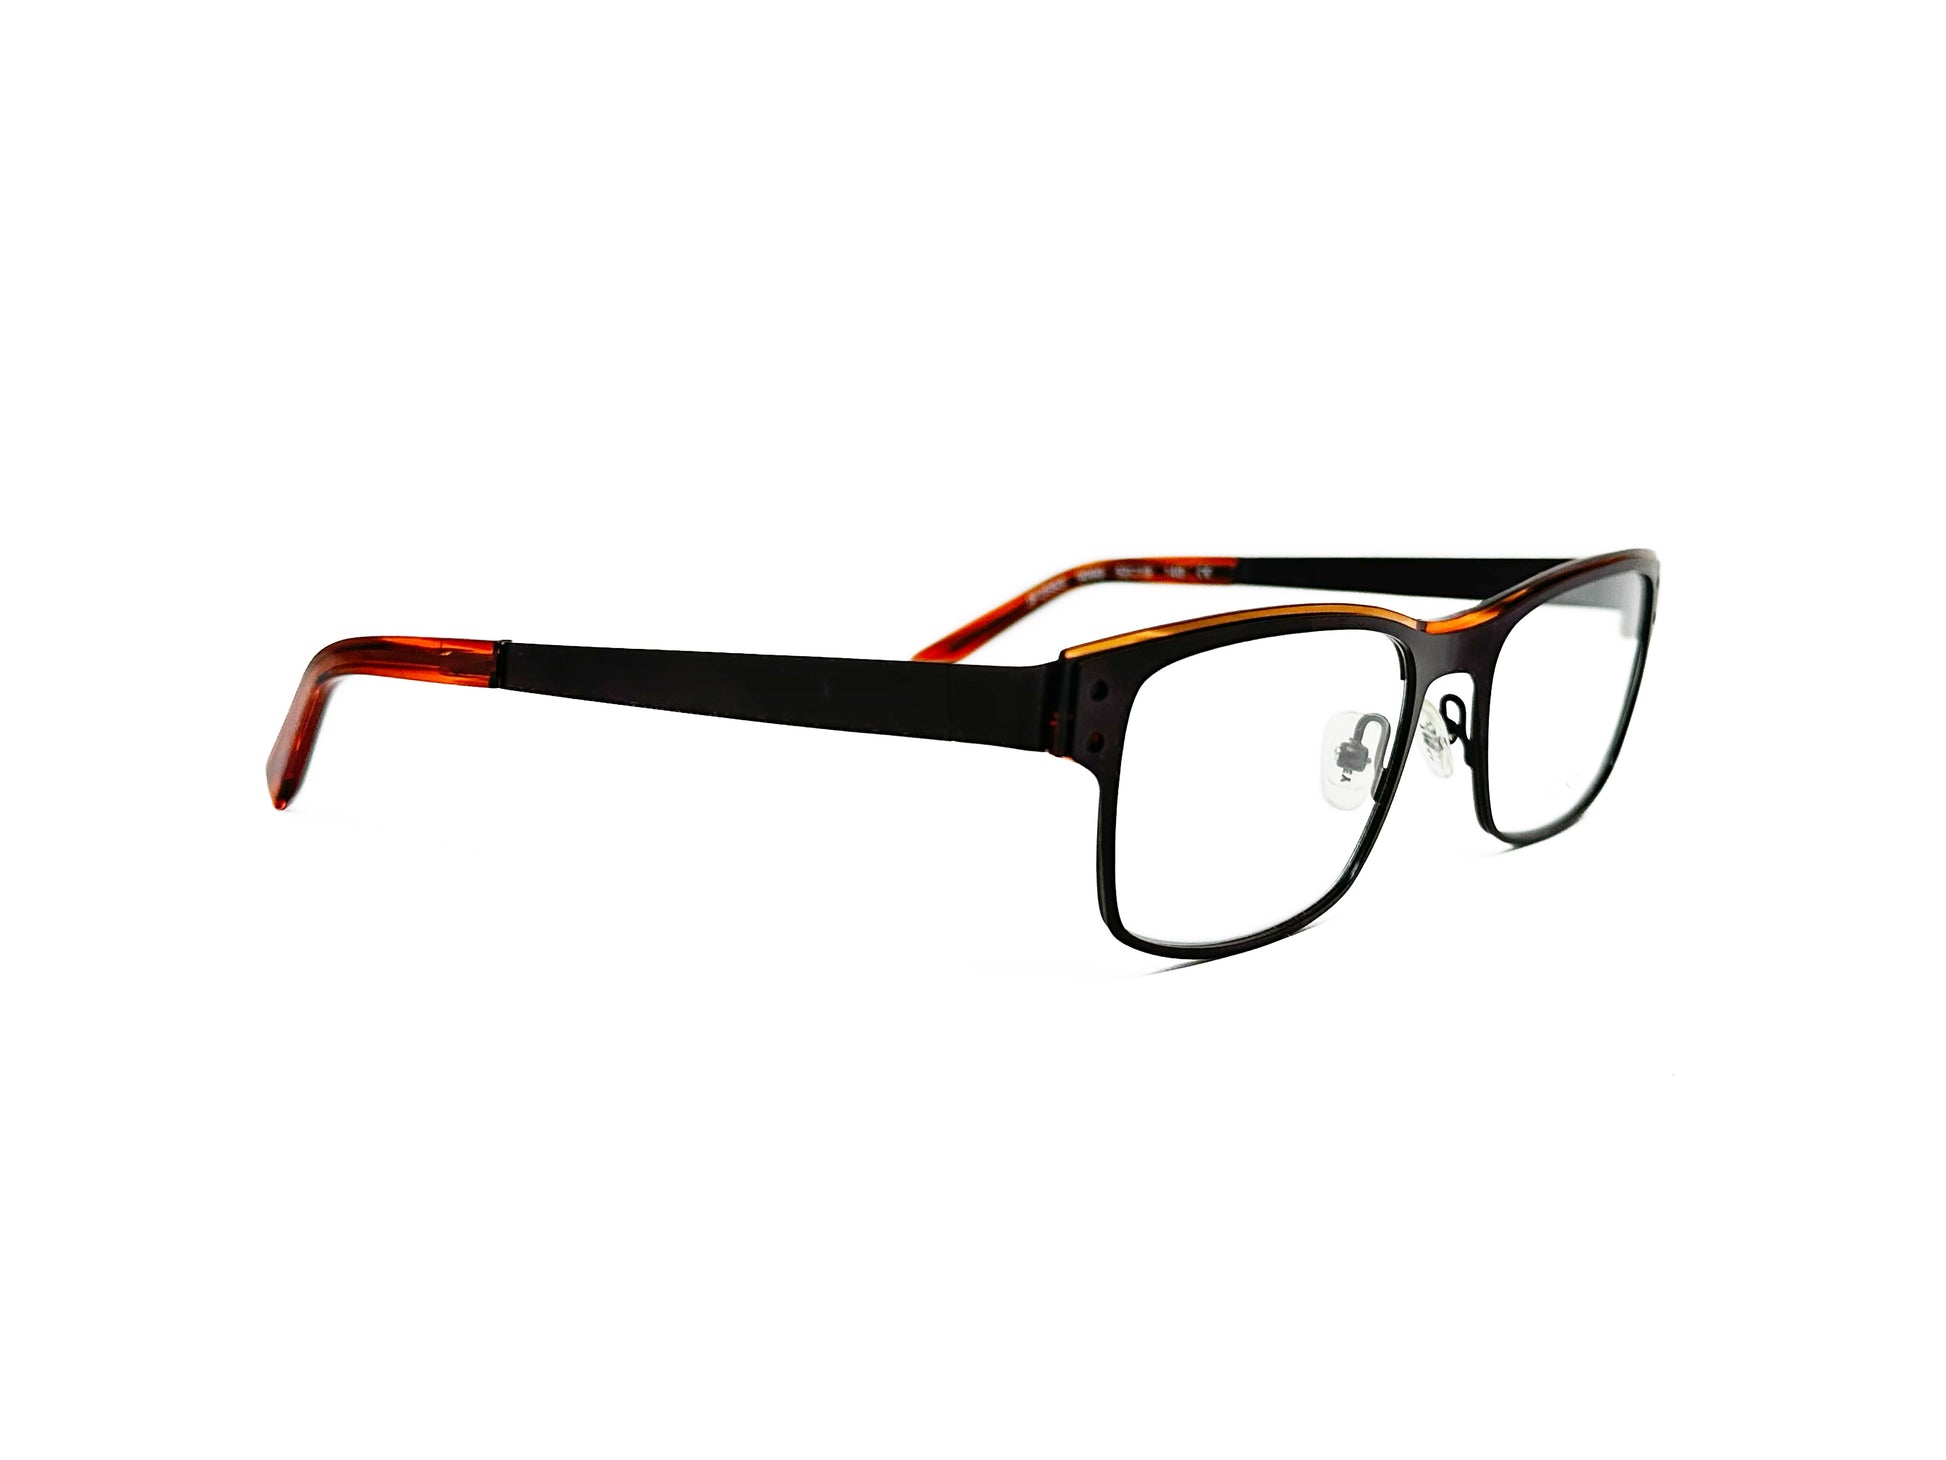 JF Rey rectangular, acetate, optical farme with amber sliver on top. Model: JF2553. Color: 9060 - Black with amber accent. Side view.